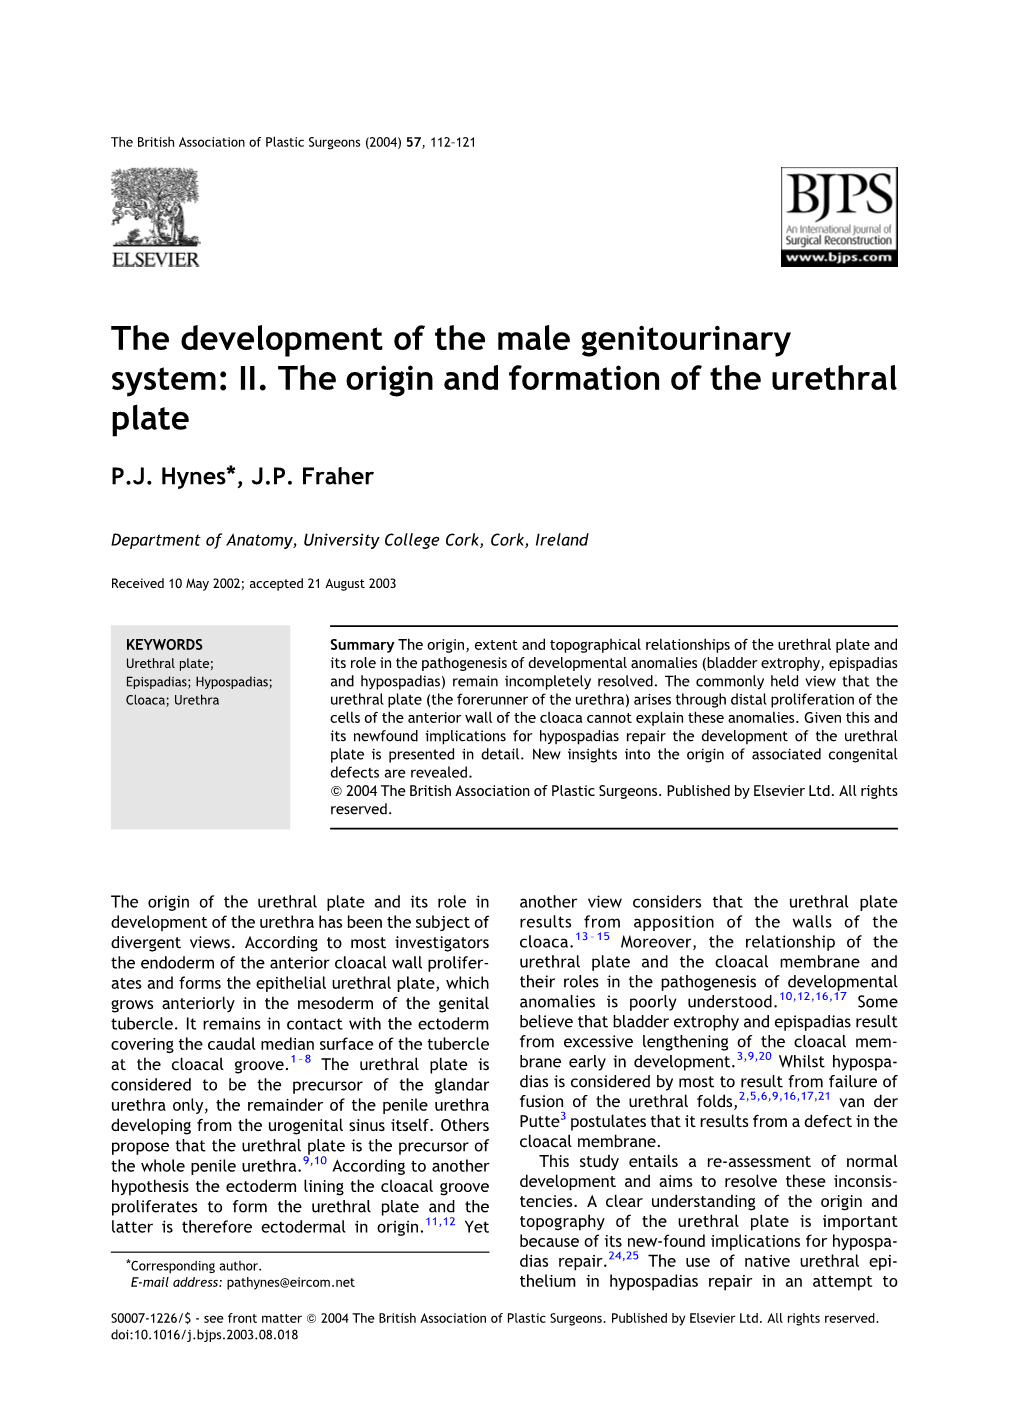 The Development of the Male Genitourinary System: II. the Origin and Formation of the Urethral Plate